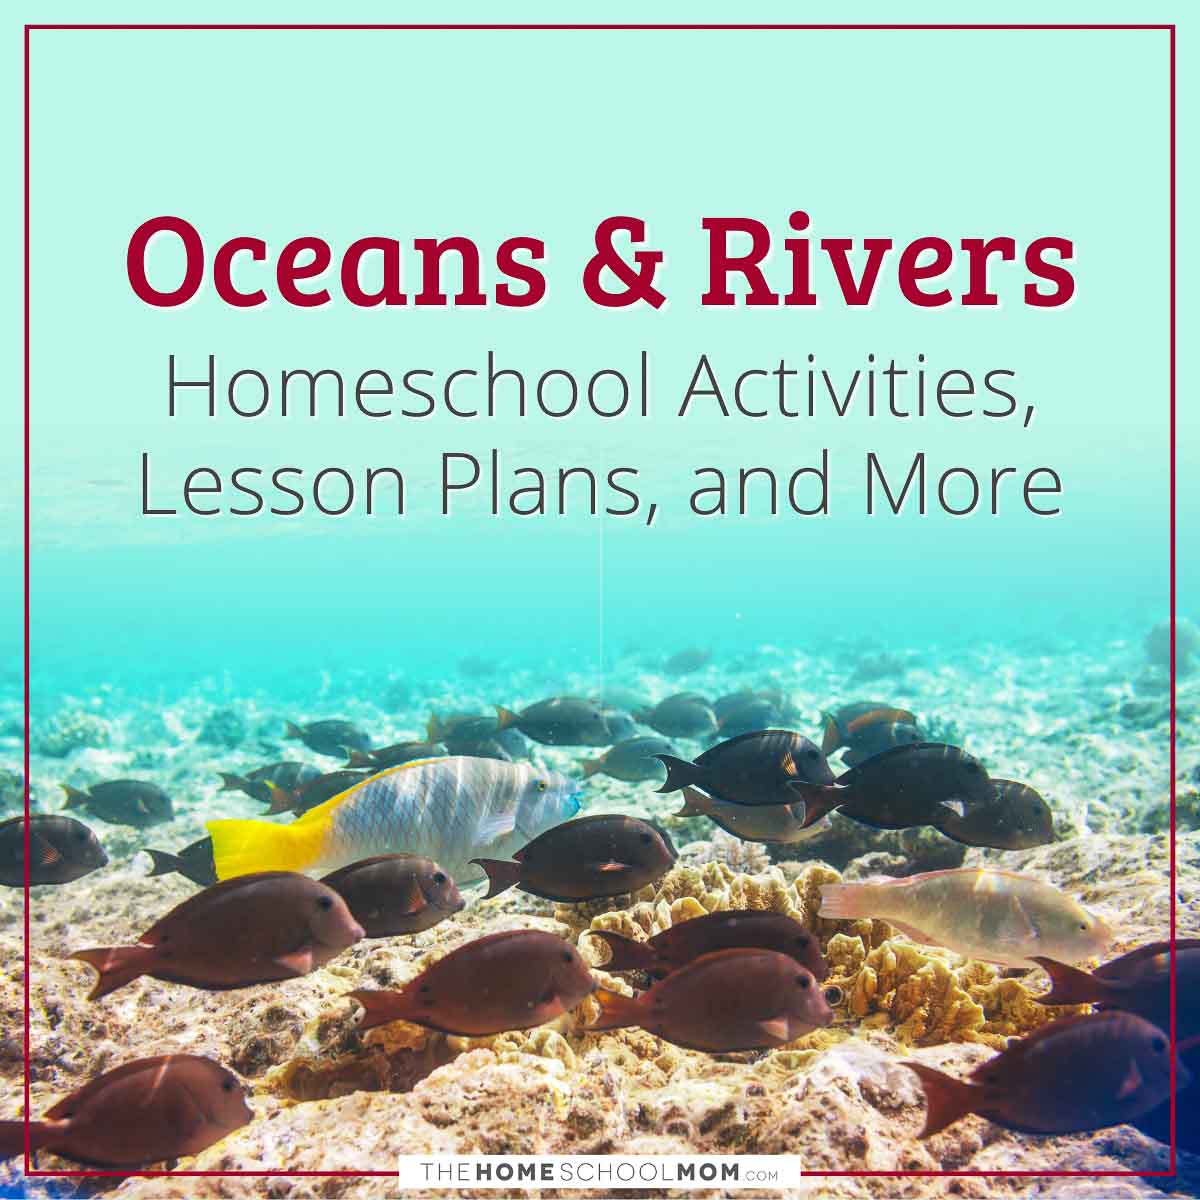 Oceans and Rivers Homeschool Activities, Lesson Plans, and More.